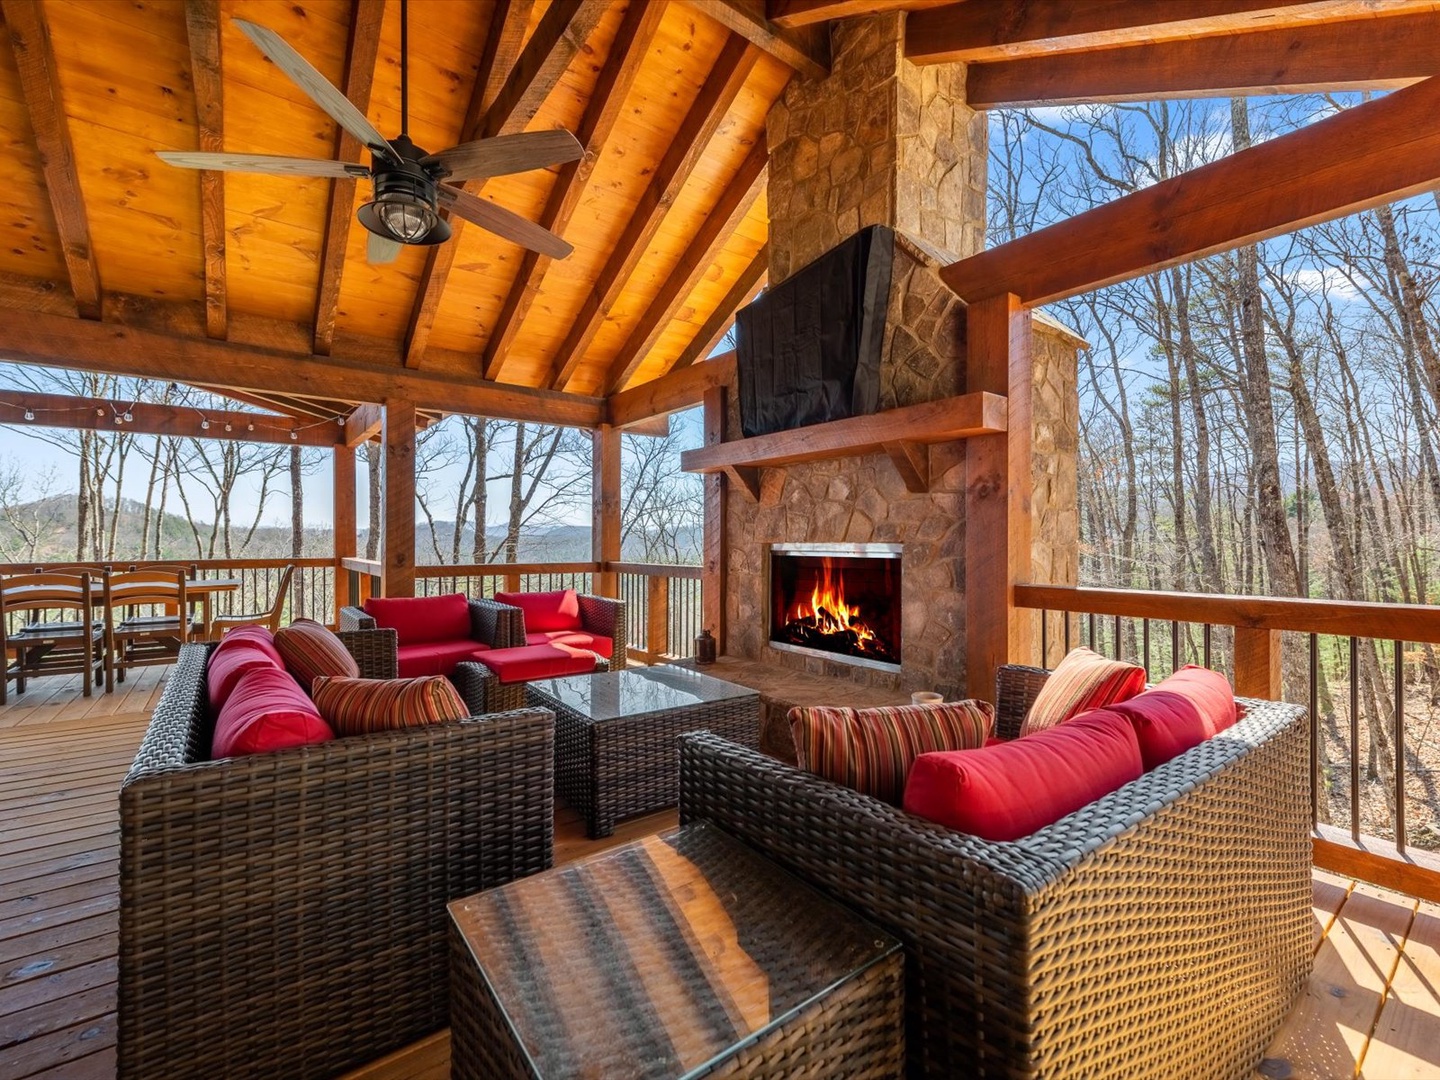 Tranquil Escape of Blue Ridge - Entry Level Outdoor Fireplace Seating